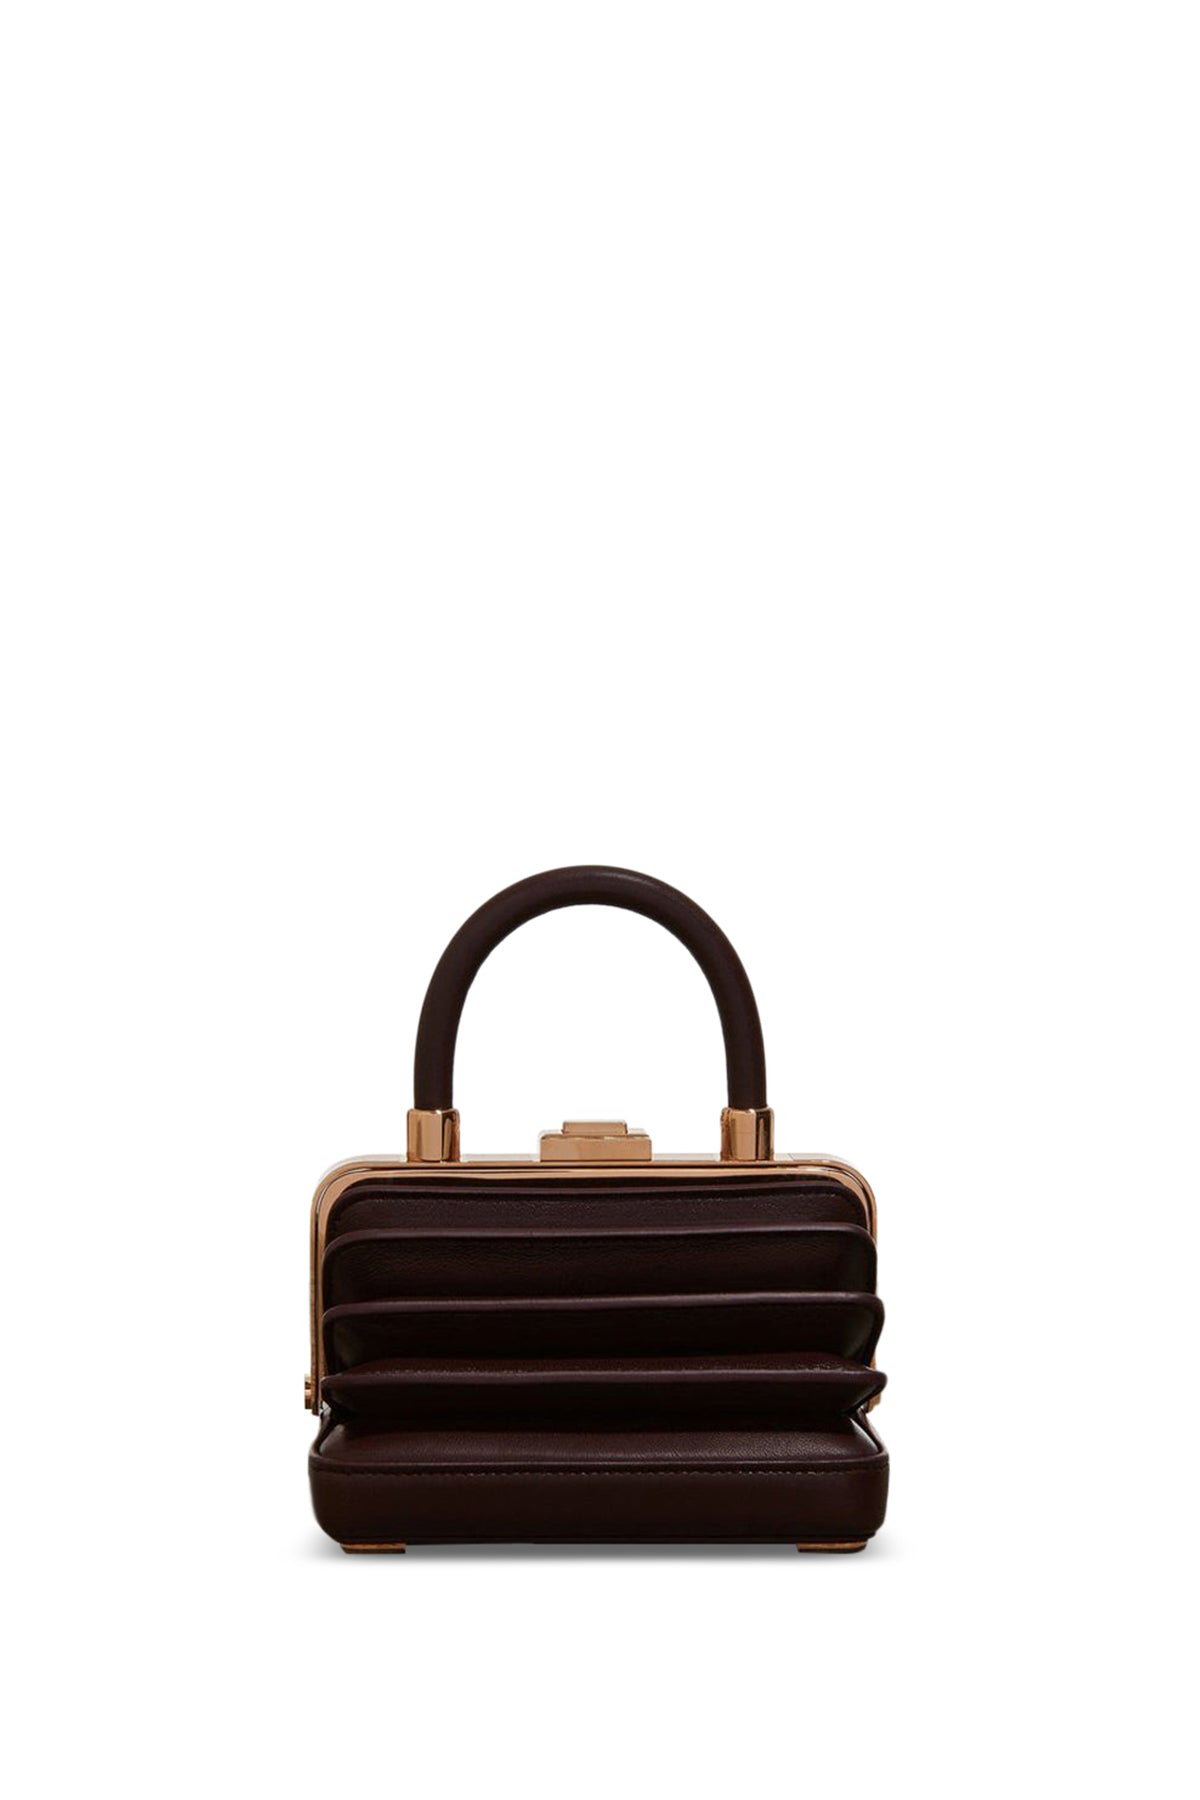 Small Diana Bag in Bordeaux Nappa Leather